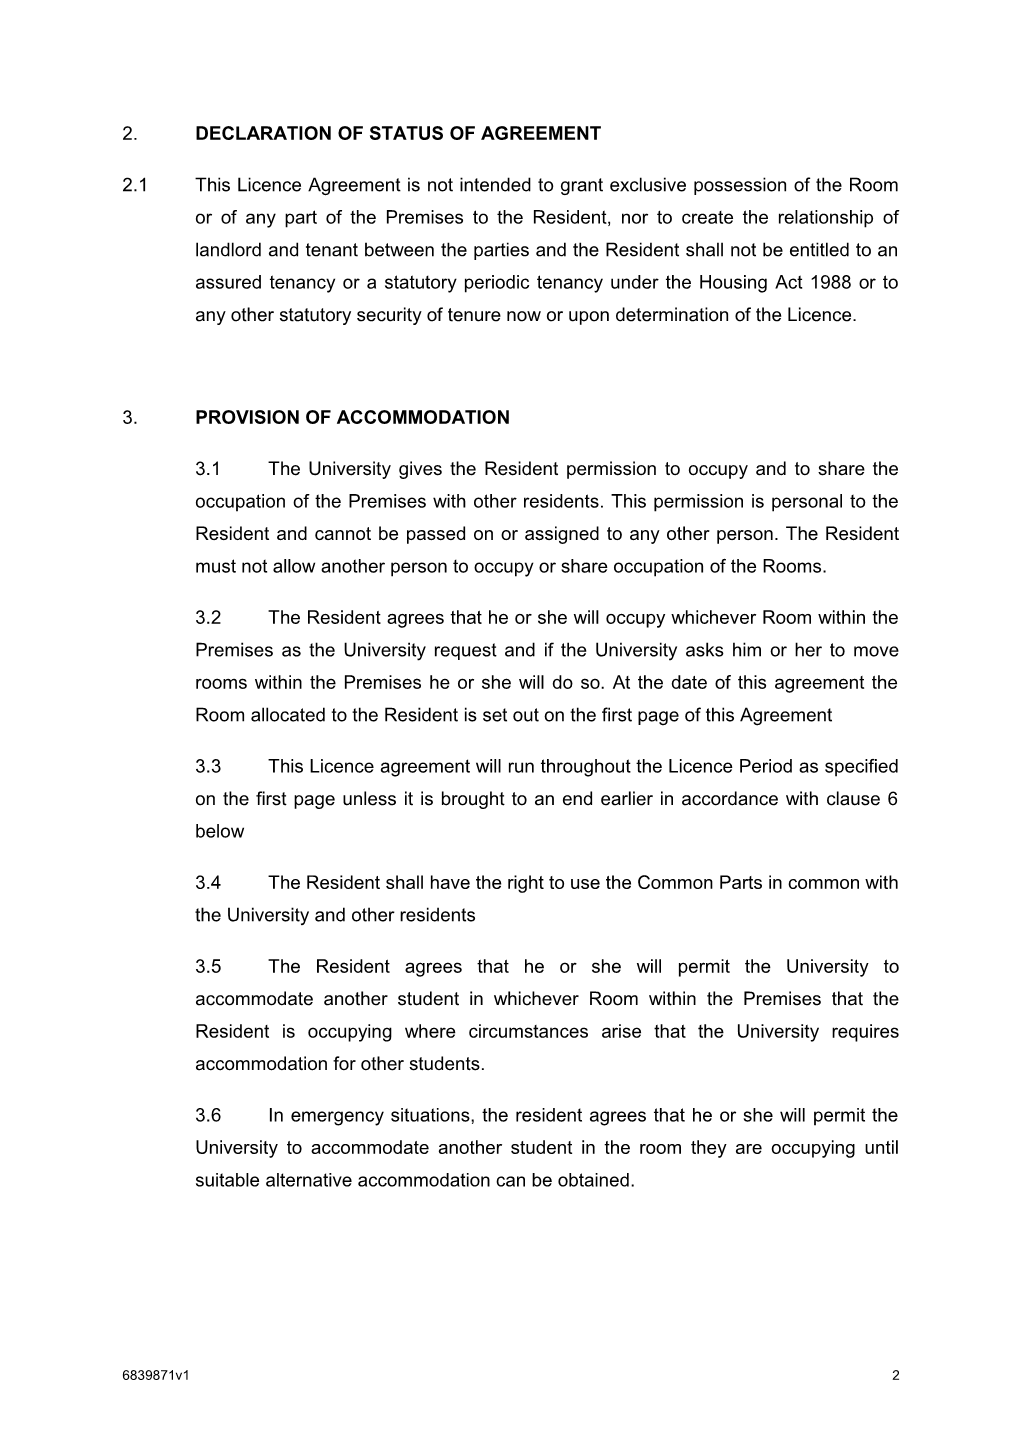 Student Residential Licence Agreement Terms and Conditions